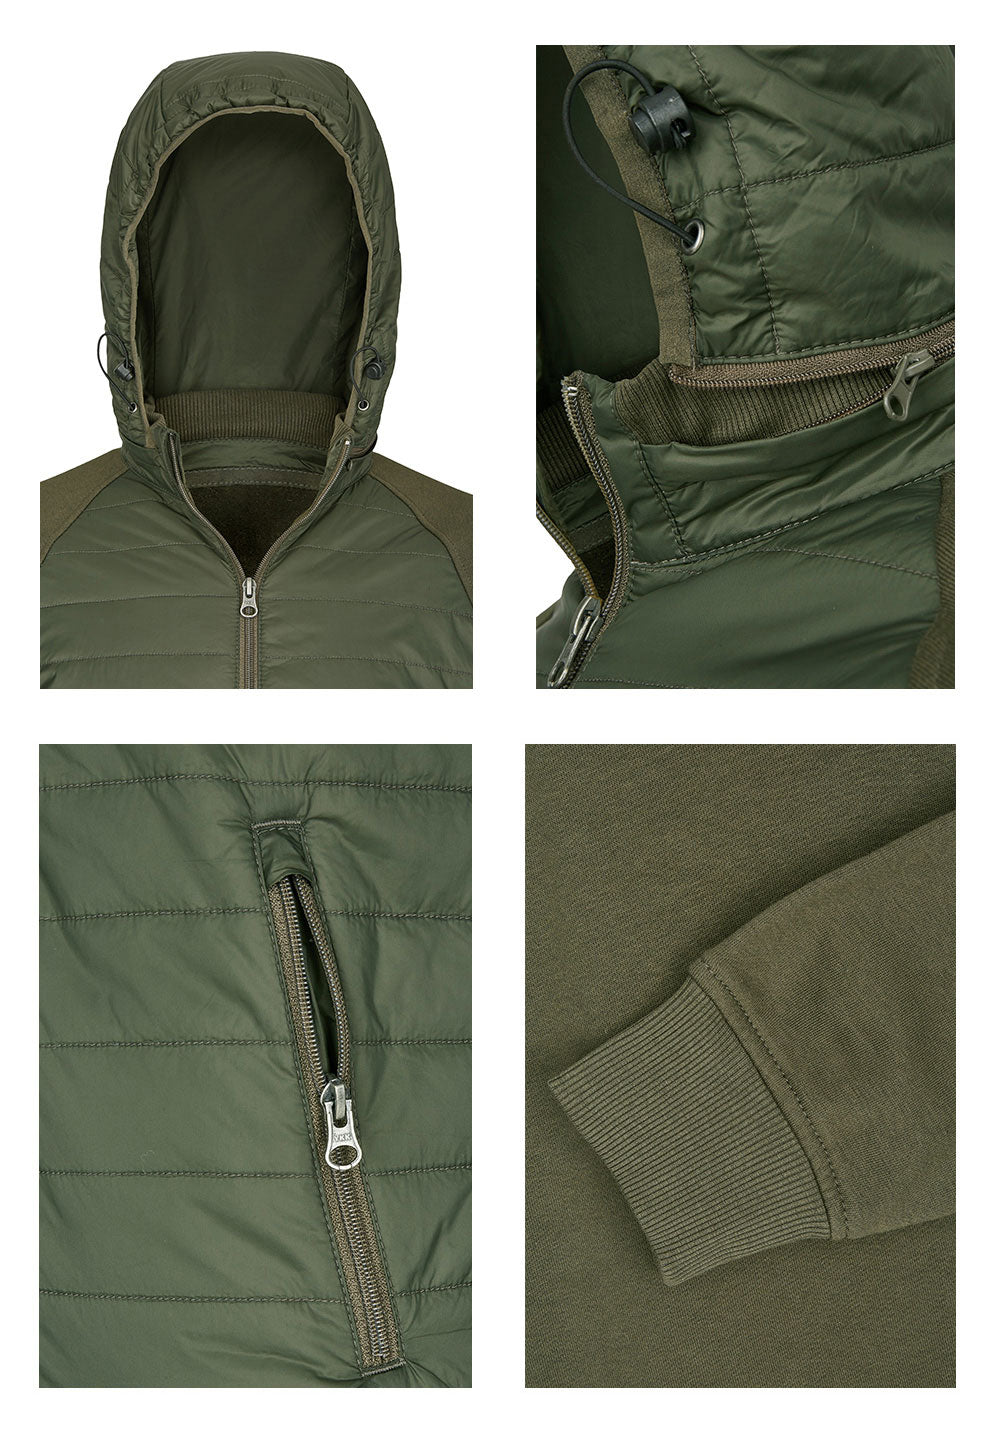 MMT 0810 Hybrid Material-Mix Sweat Jacket